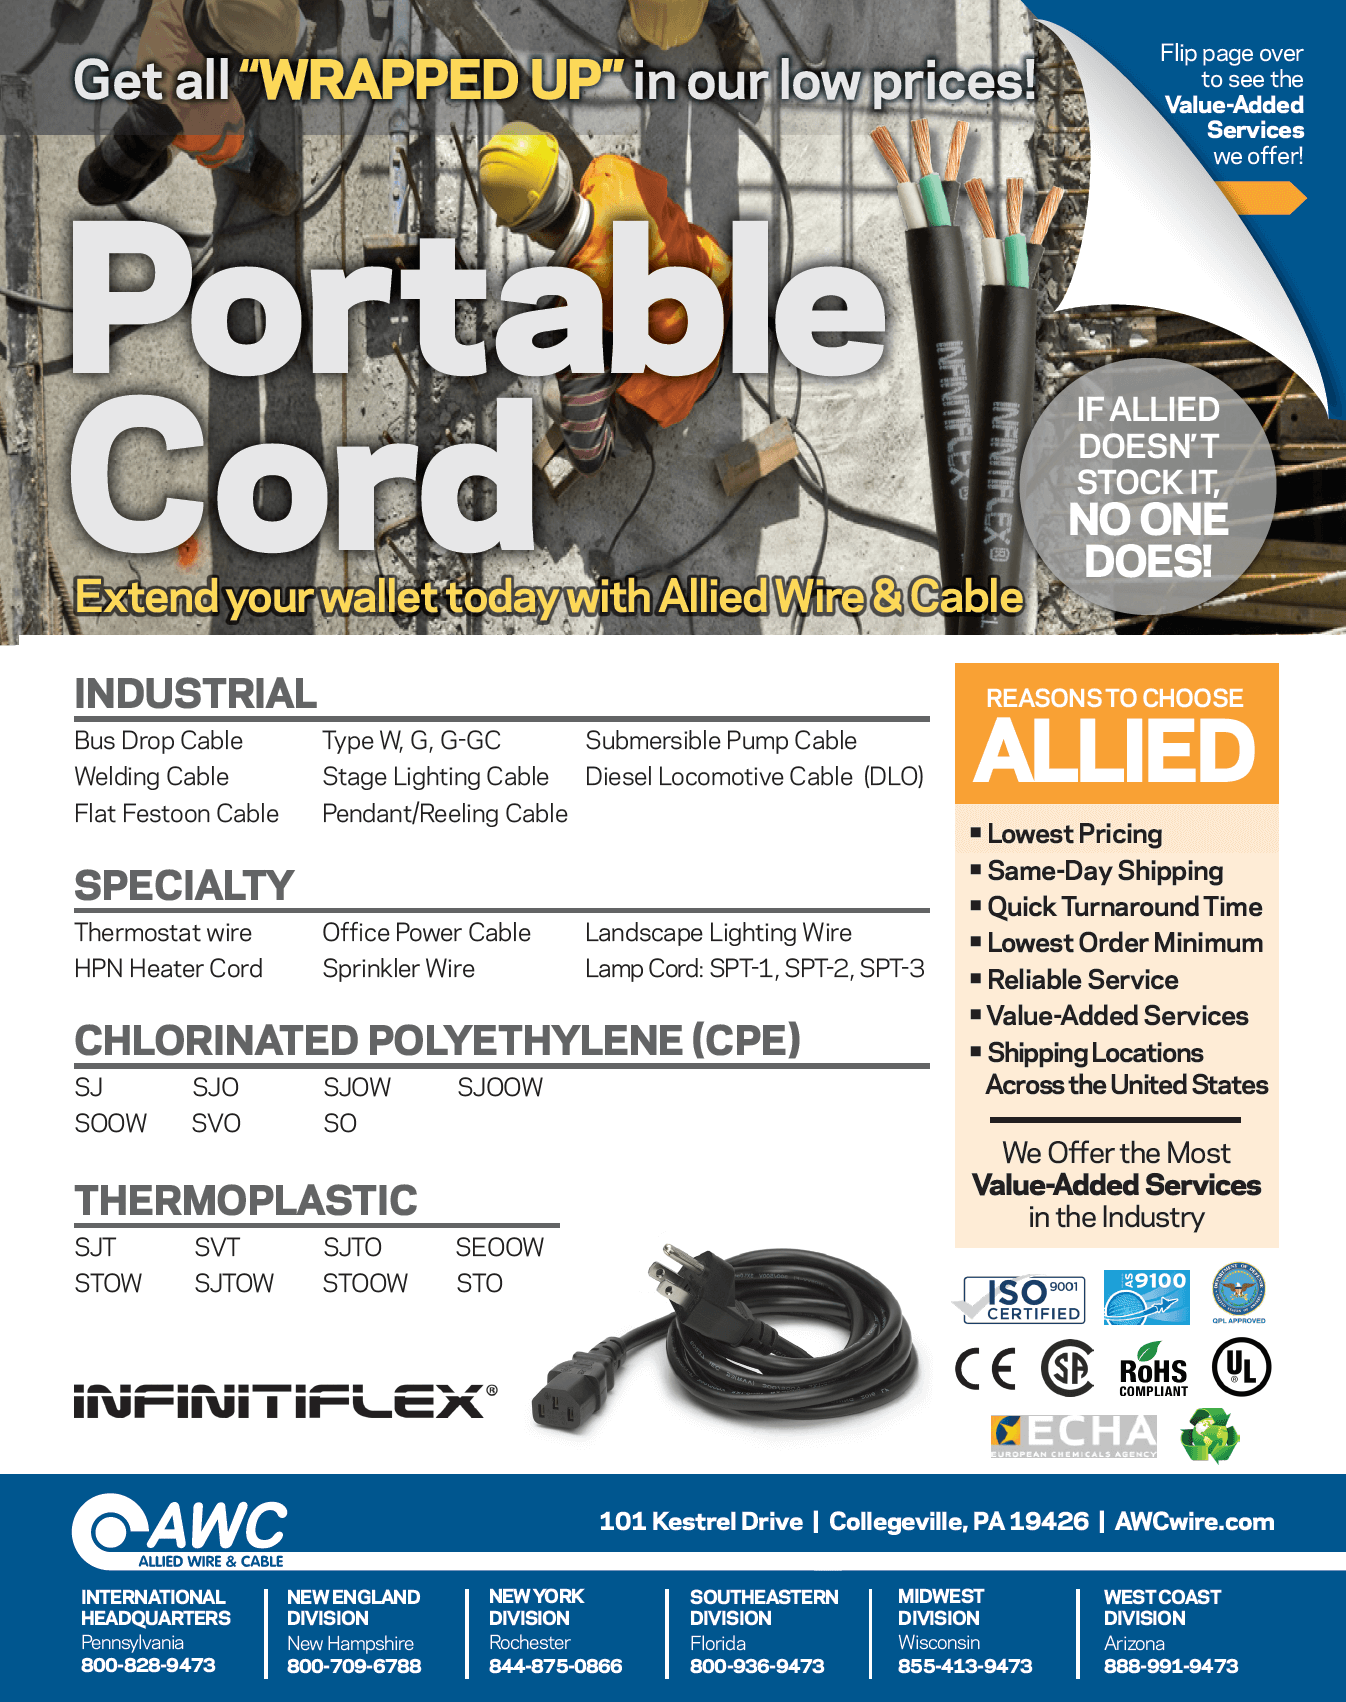 Portable Cord Line Card from Allied Wire & Cable